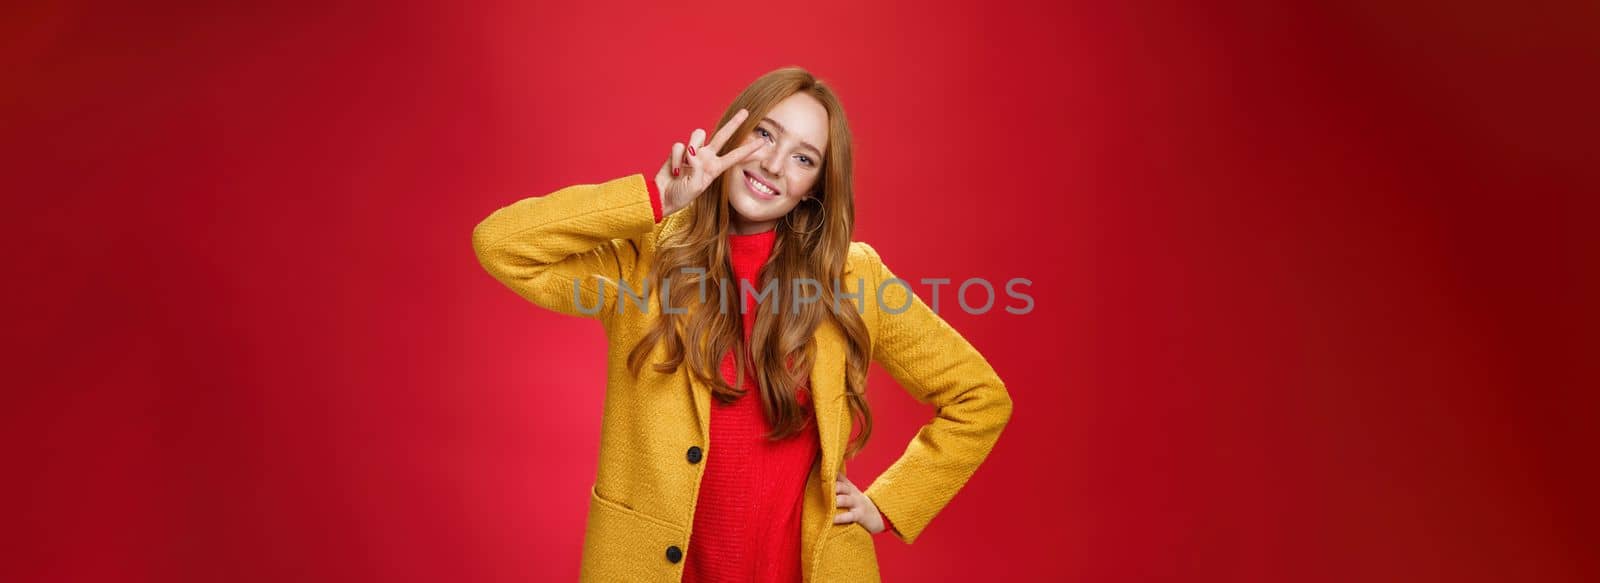 Friendly girl smiling happily, tilting head and showing peace or victory gesture near face, holding hand on hip as posing in stylish elegant yellow coat and sweater against red background. Style, emotions and fashion concept